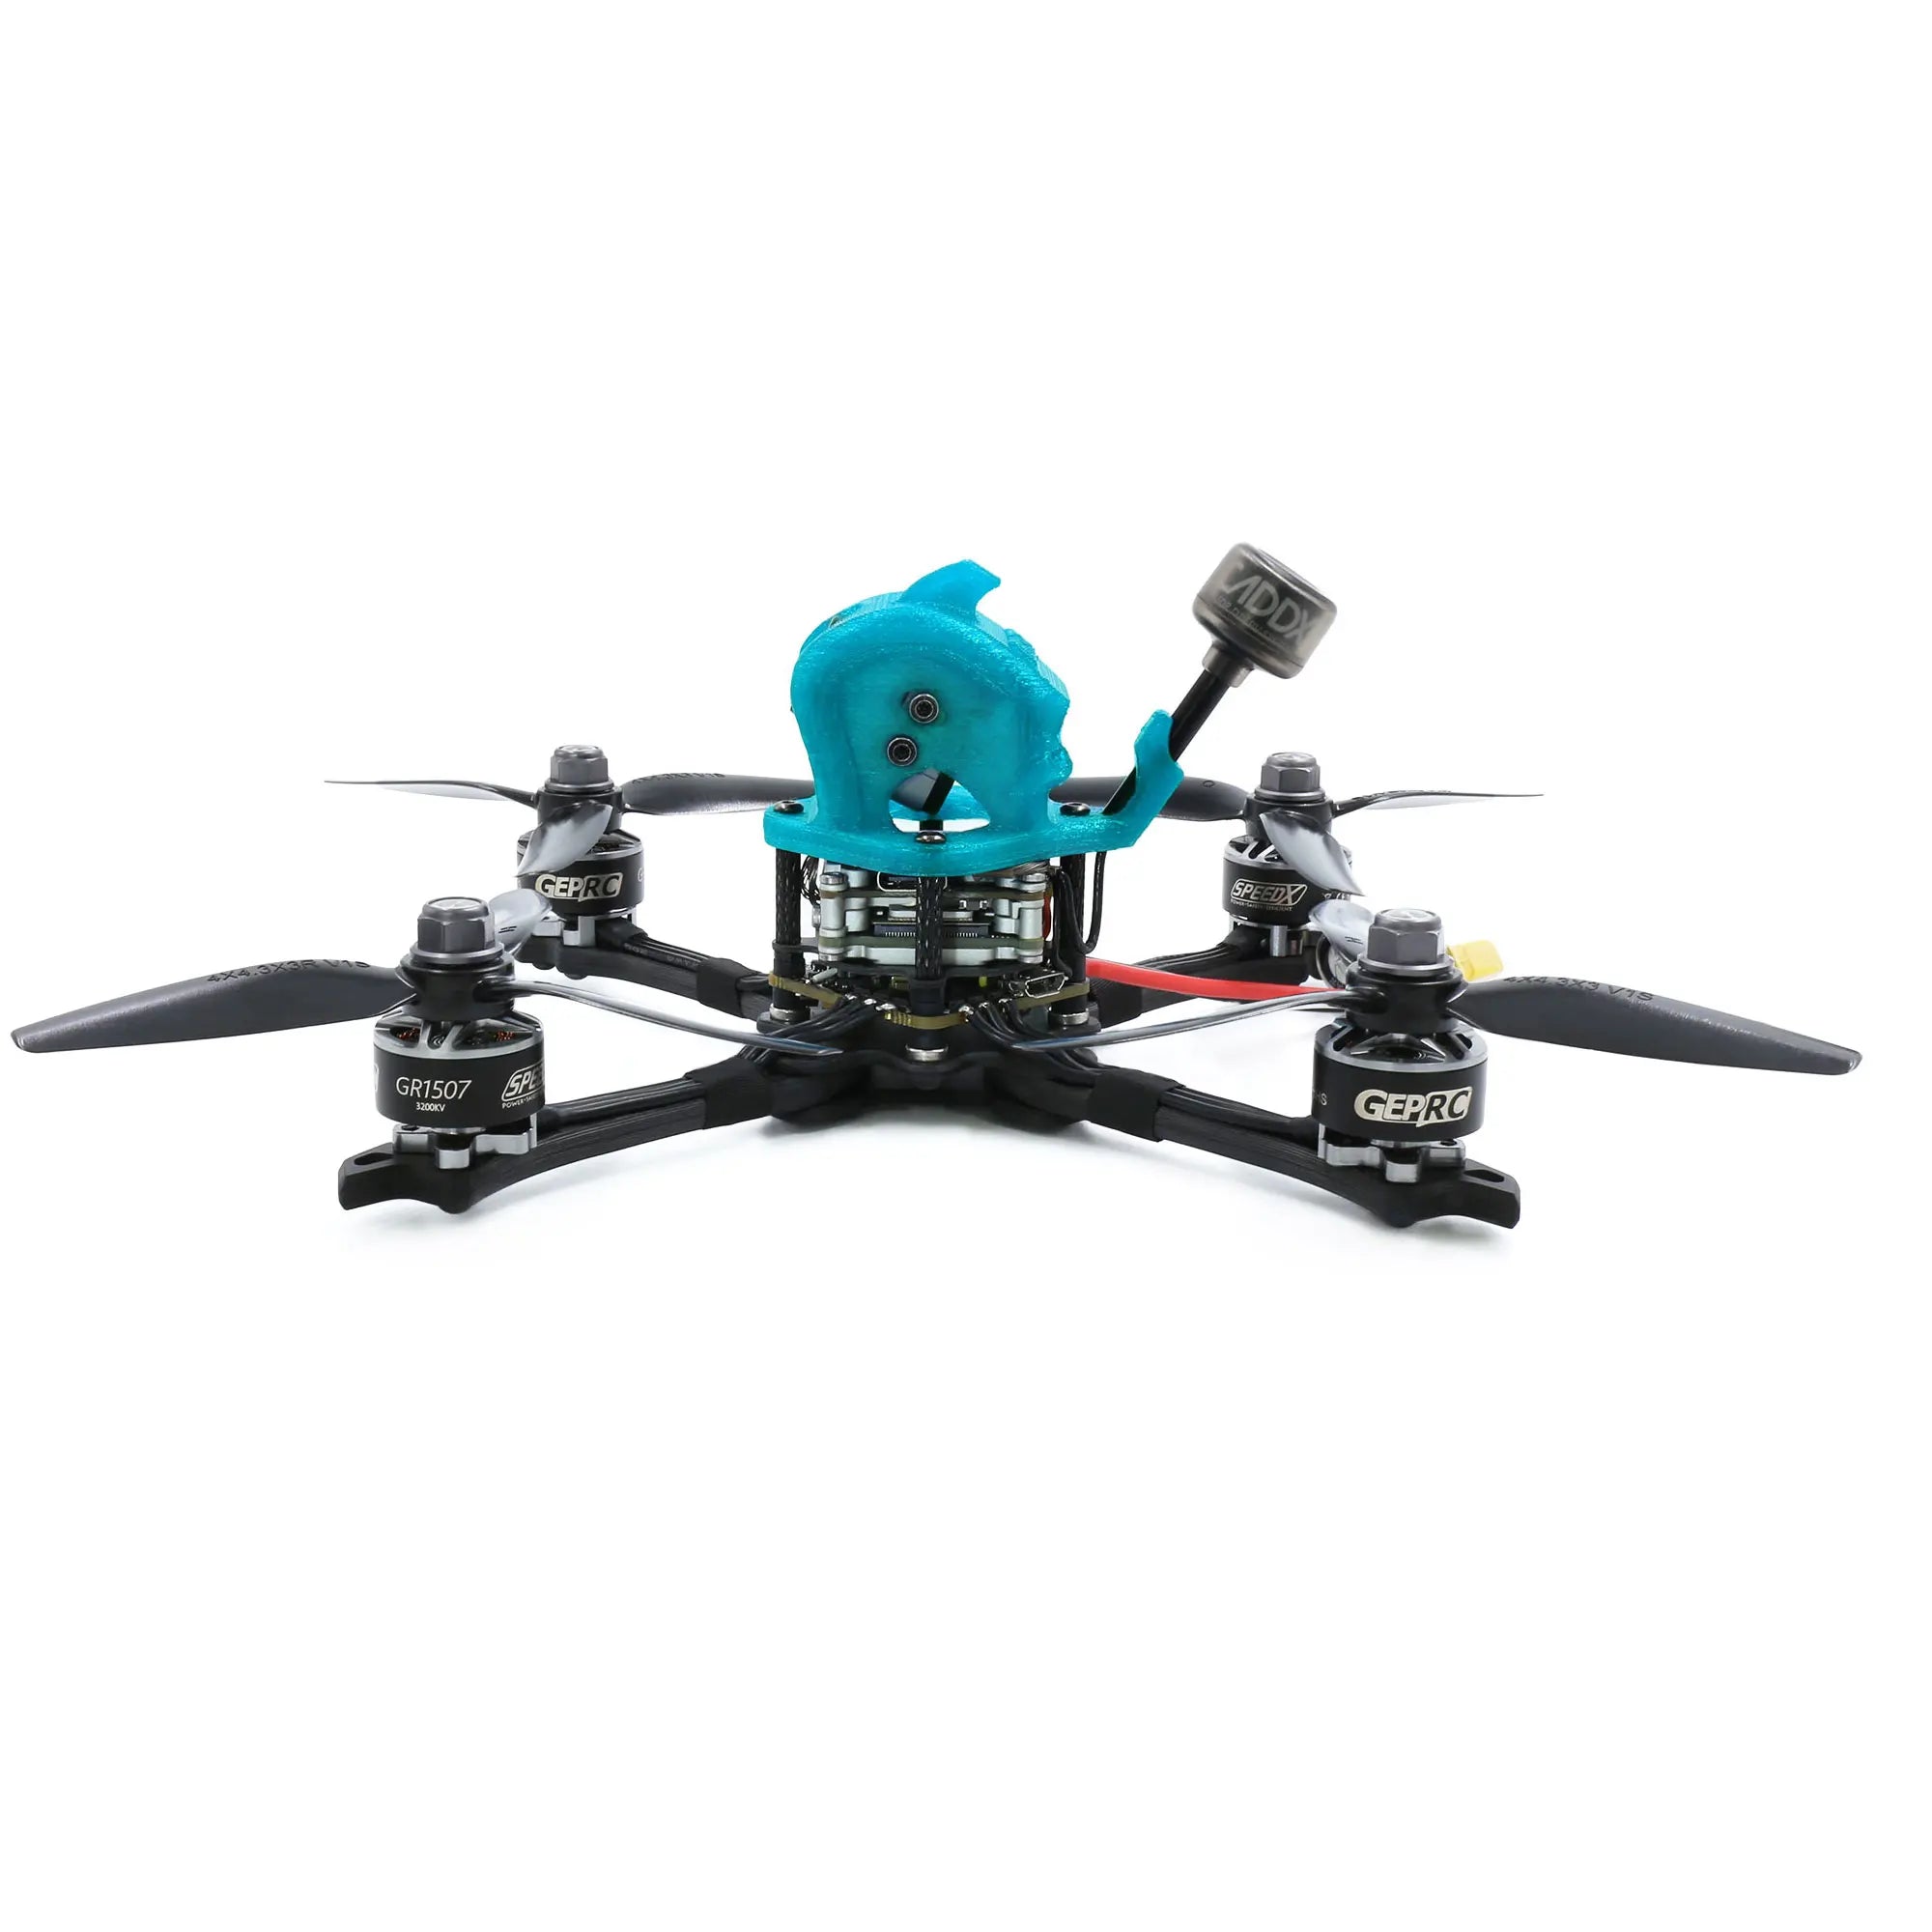 GEPRC Dolphin FPV Drone, GEPRO GPEED GR15O7 G1 nzotv GEP